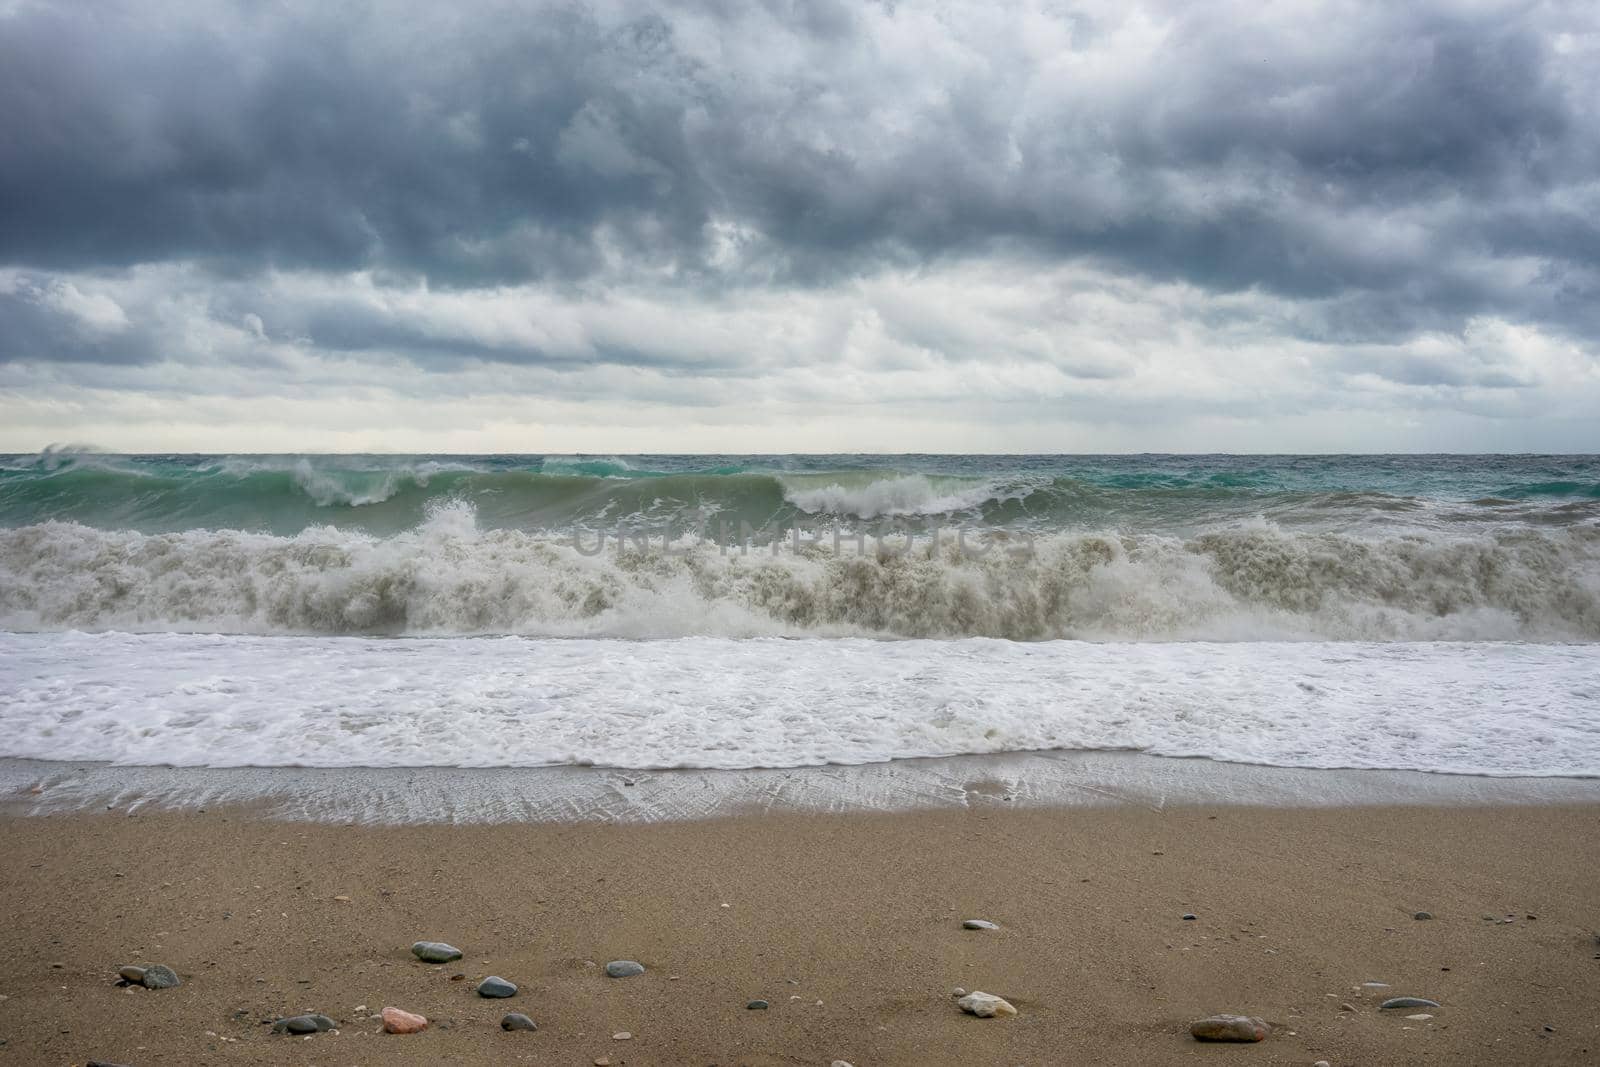 The landscape of the stormy sea under the dark clouds and the sandy beach